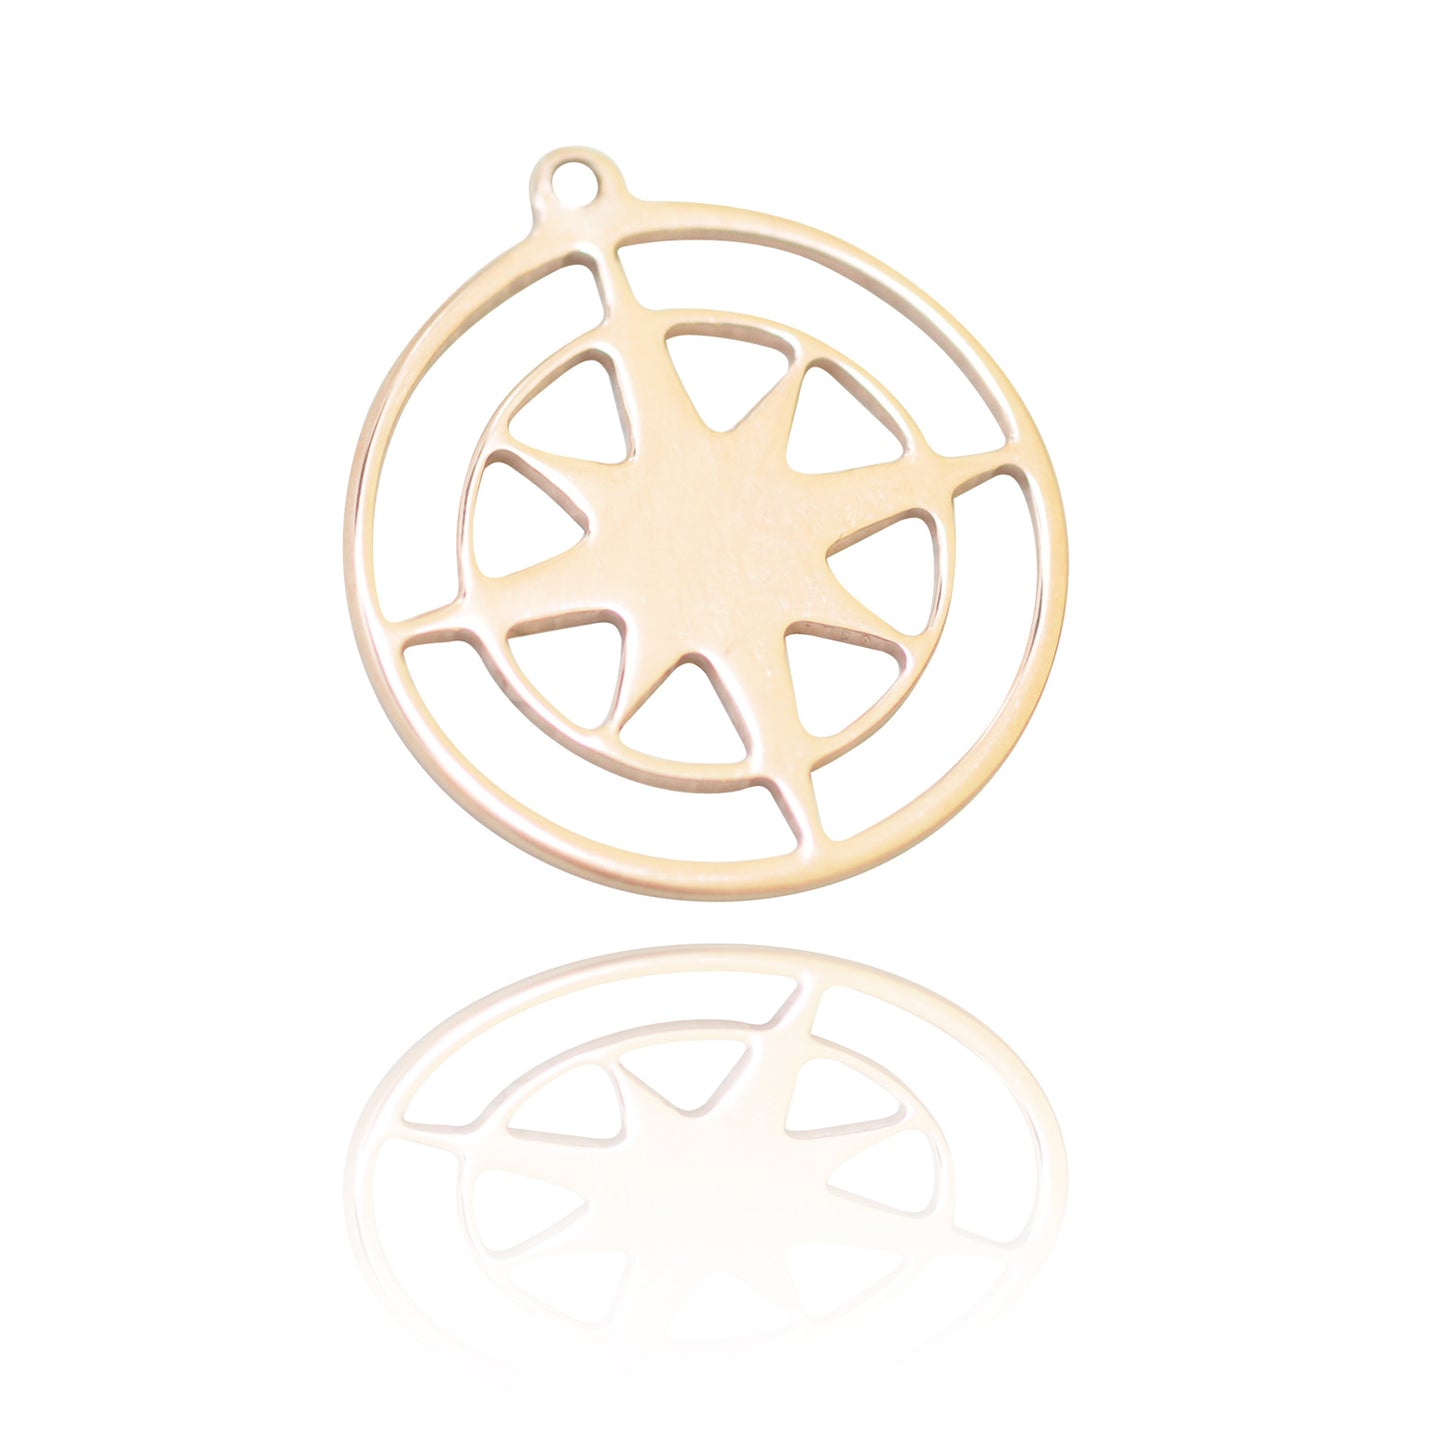 Pendant "Compass" filigree // 925 silver rose gold plated // Ø 14mm